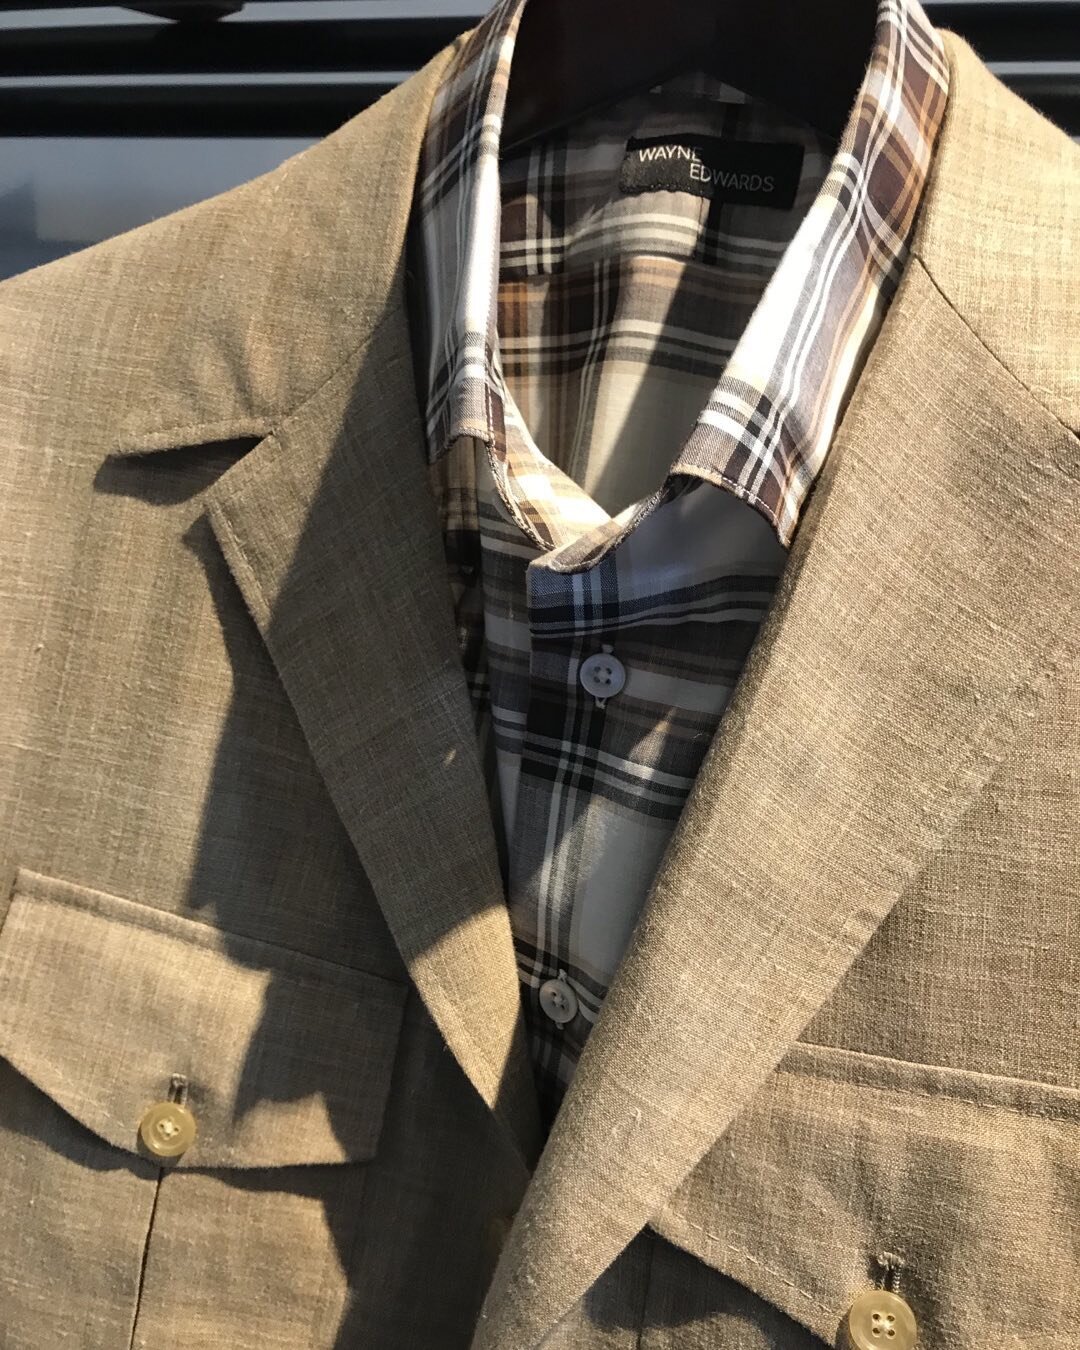 We are loving the new neutrals for the season.  Here s a new safari jacket with a cotton  and linen shirt  Great colors to work with for wardrobing.  #custom#wayneedwards#dormeuil